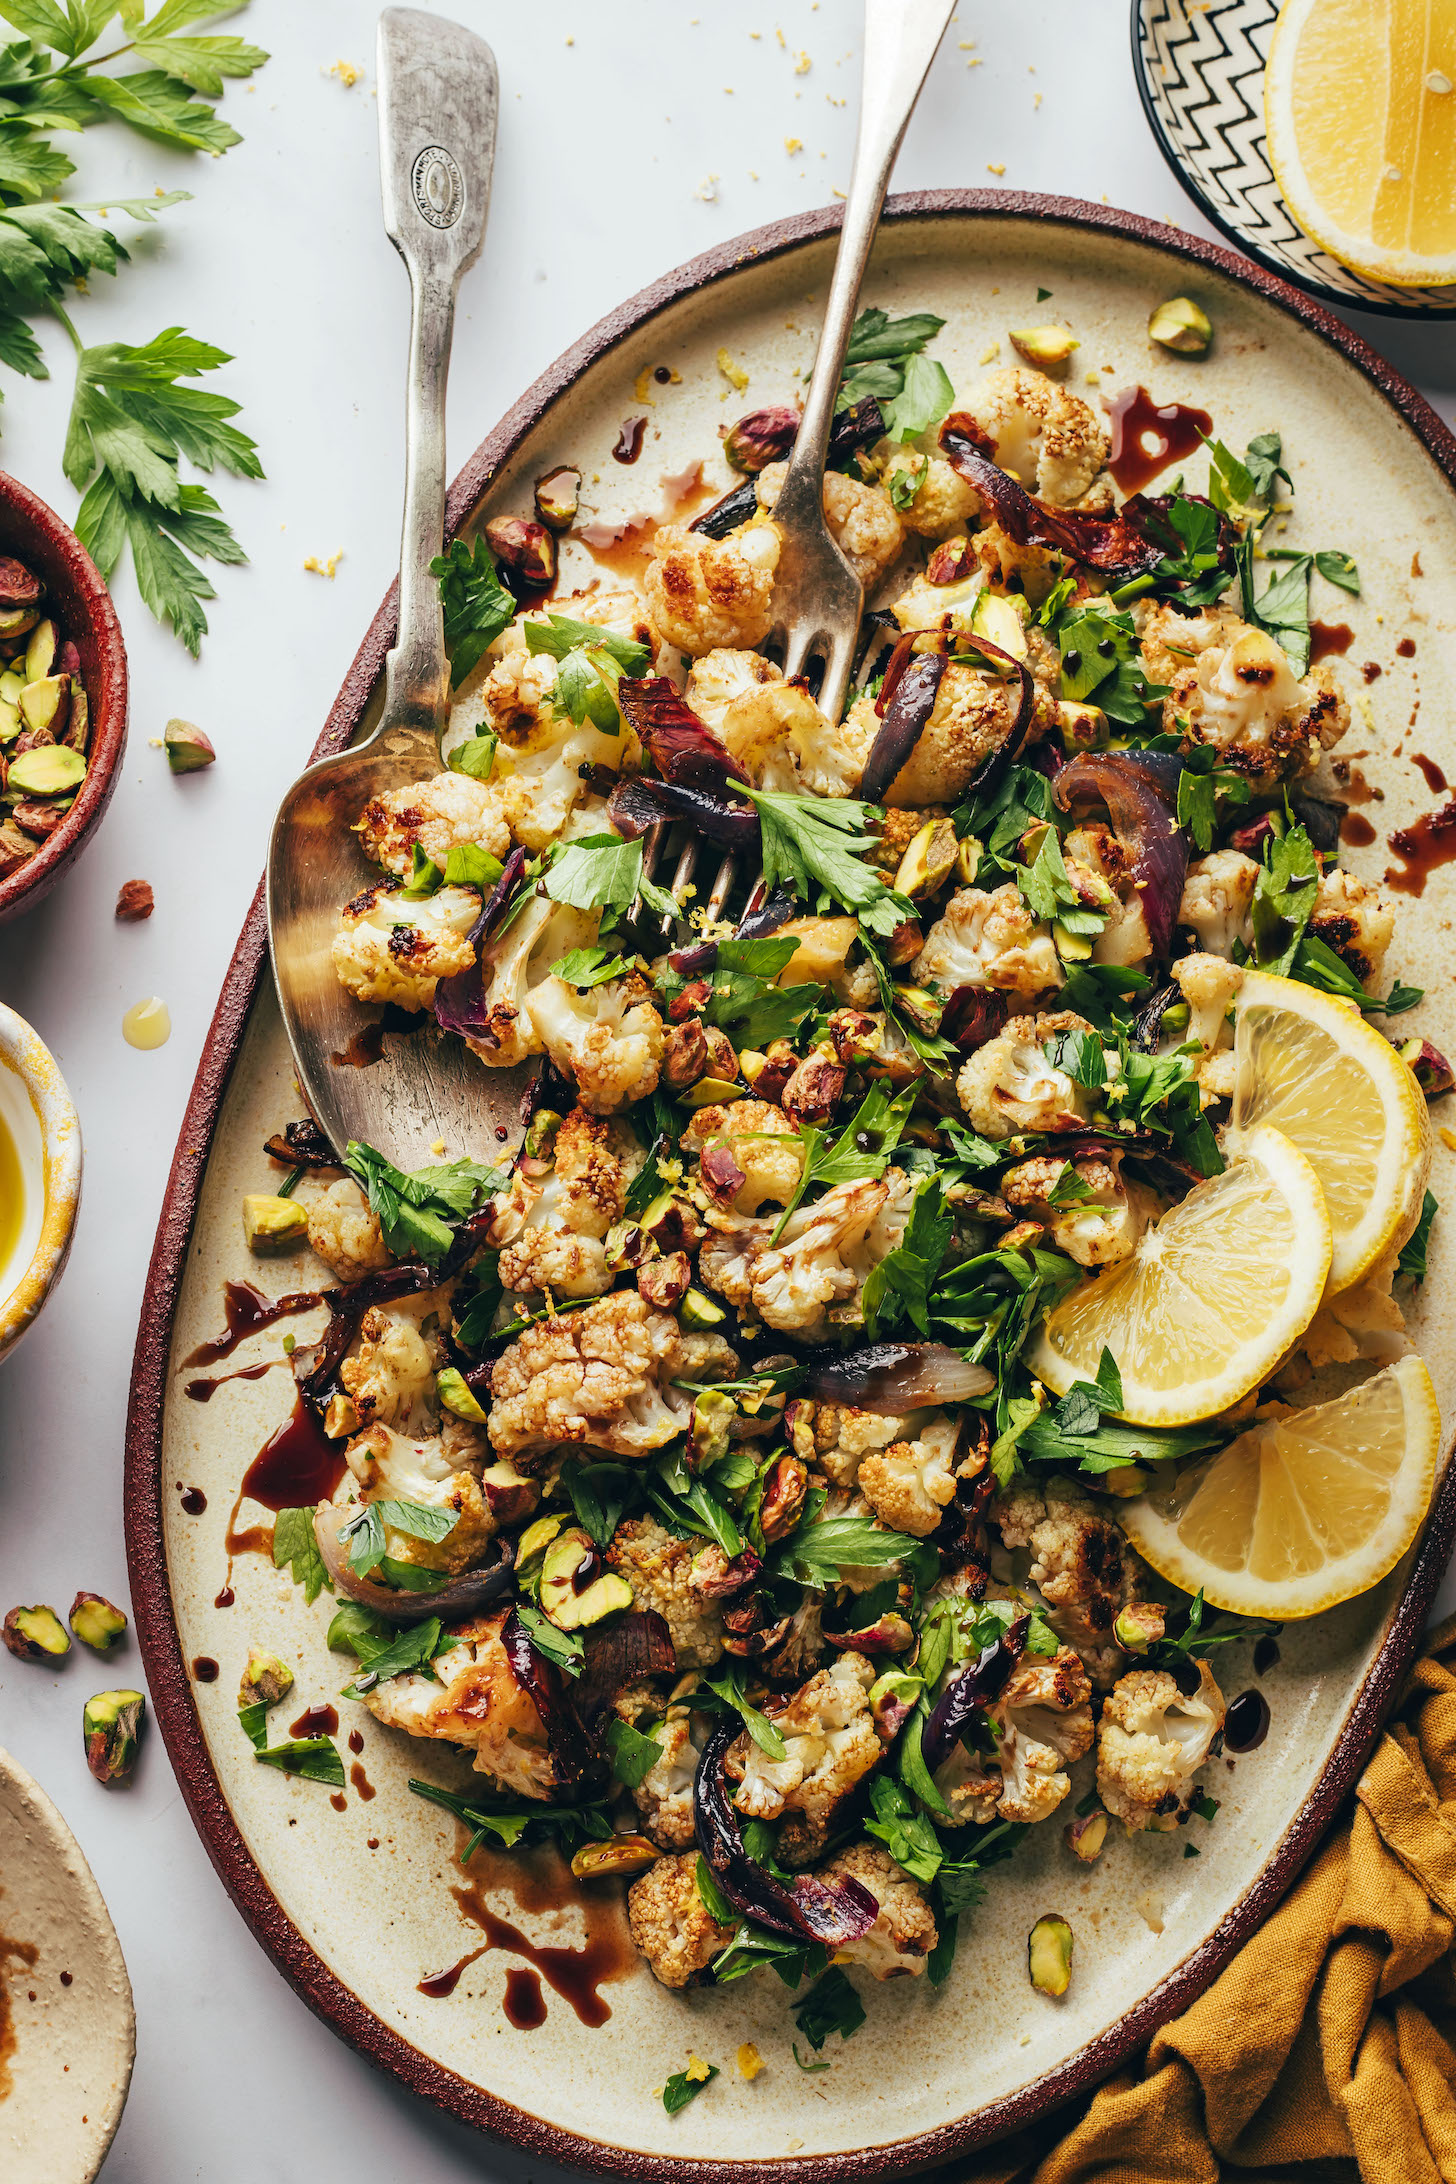 Dish of roasted cauliflower salad with pistachios, parsley and roasted red onion